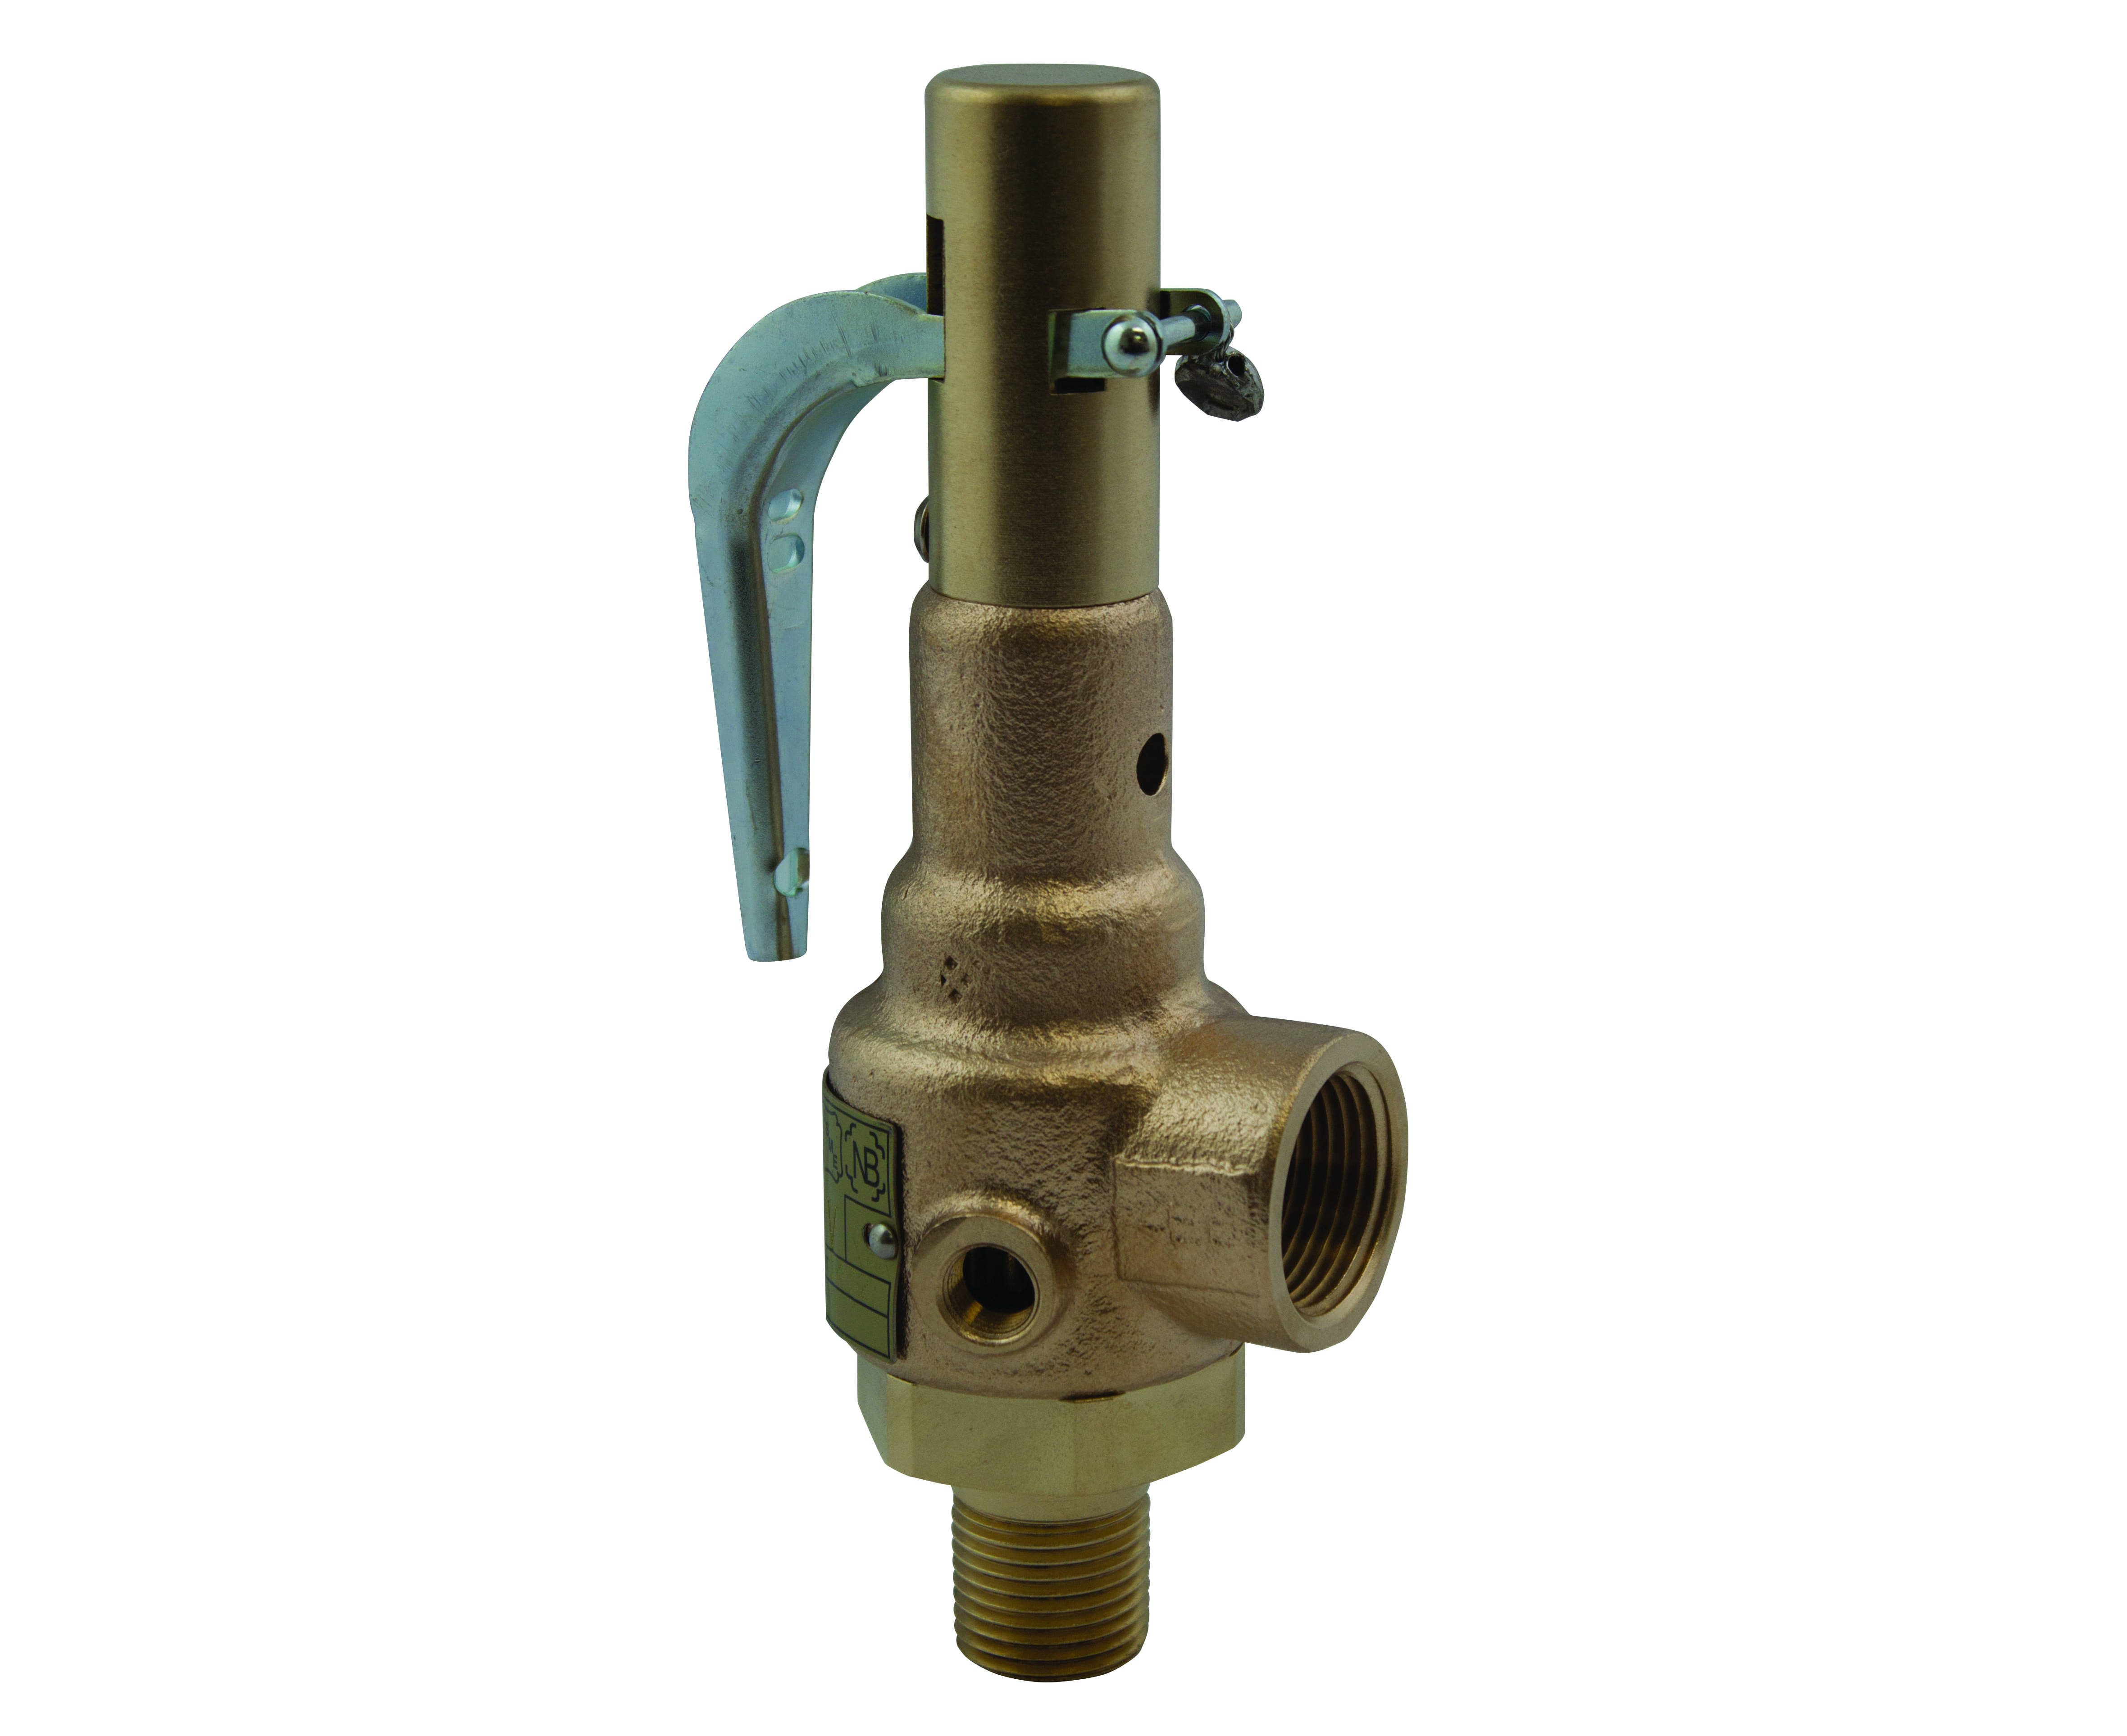 Preview image for Apollo ASME Sec I Steam Bronze Safety Relief Valves with Brass Trim, Teflon Seat, CE/PED Compliant, Performance Test Reports Included, 1-1/4" x 1-1/2" (MNPT x FNPT)